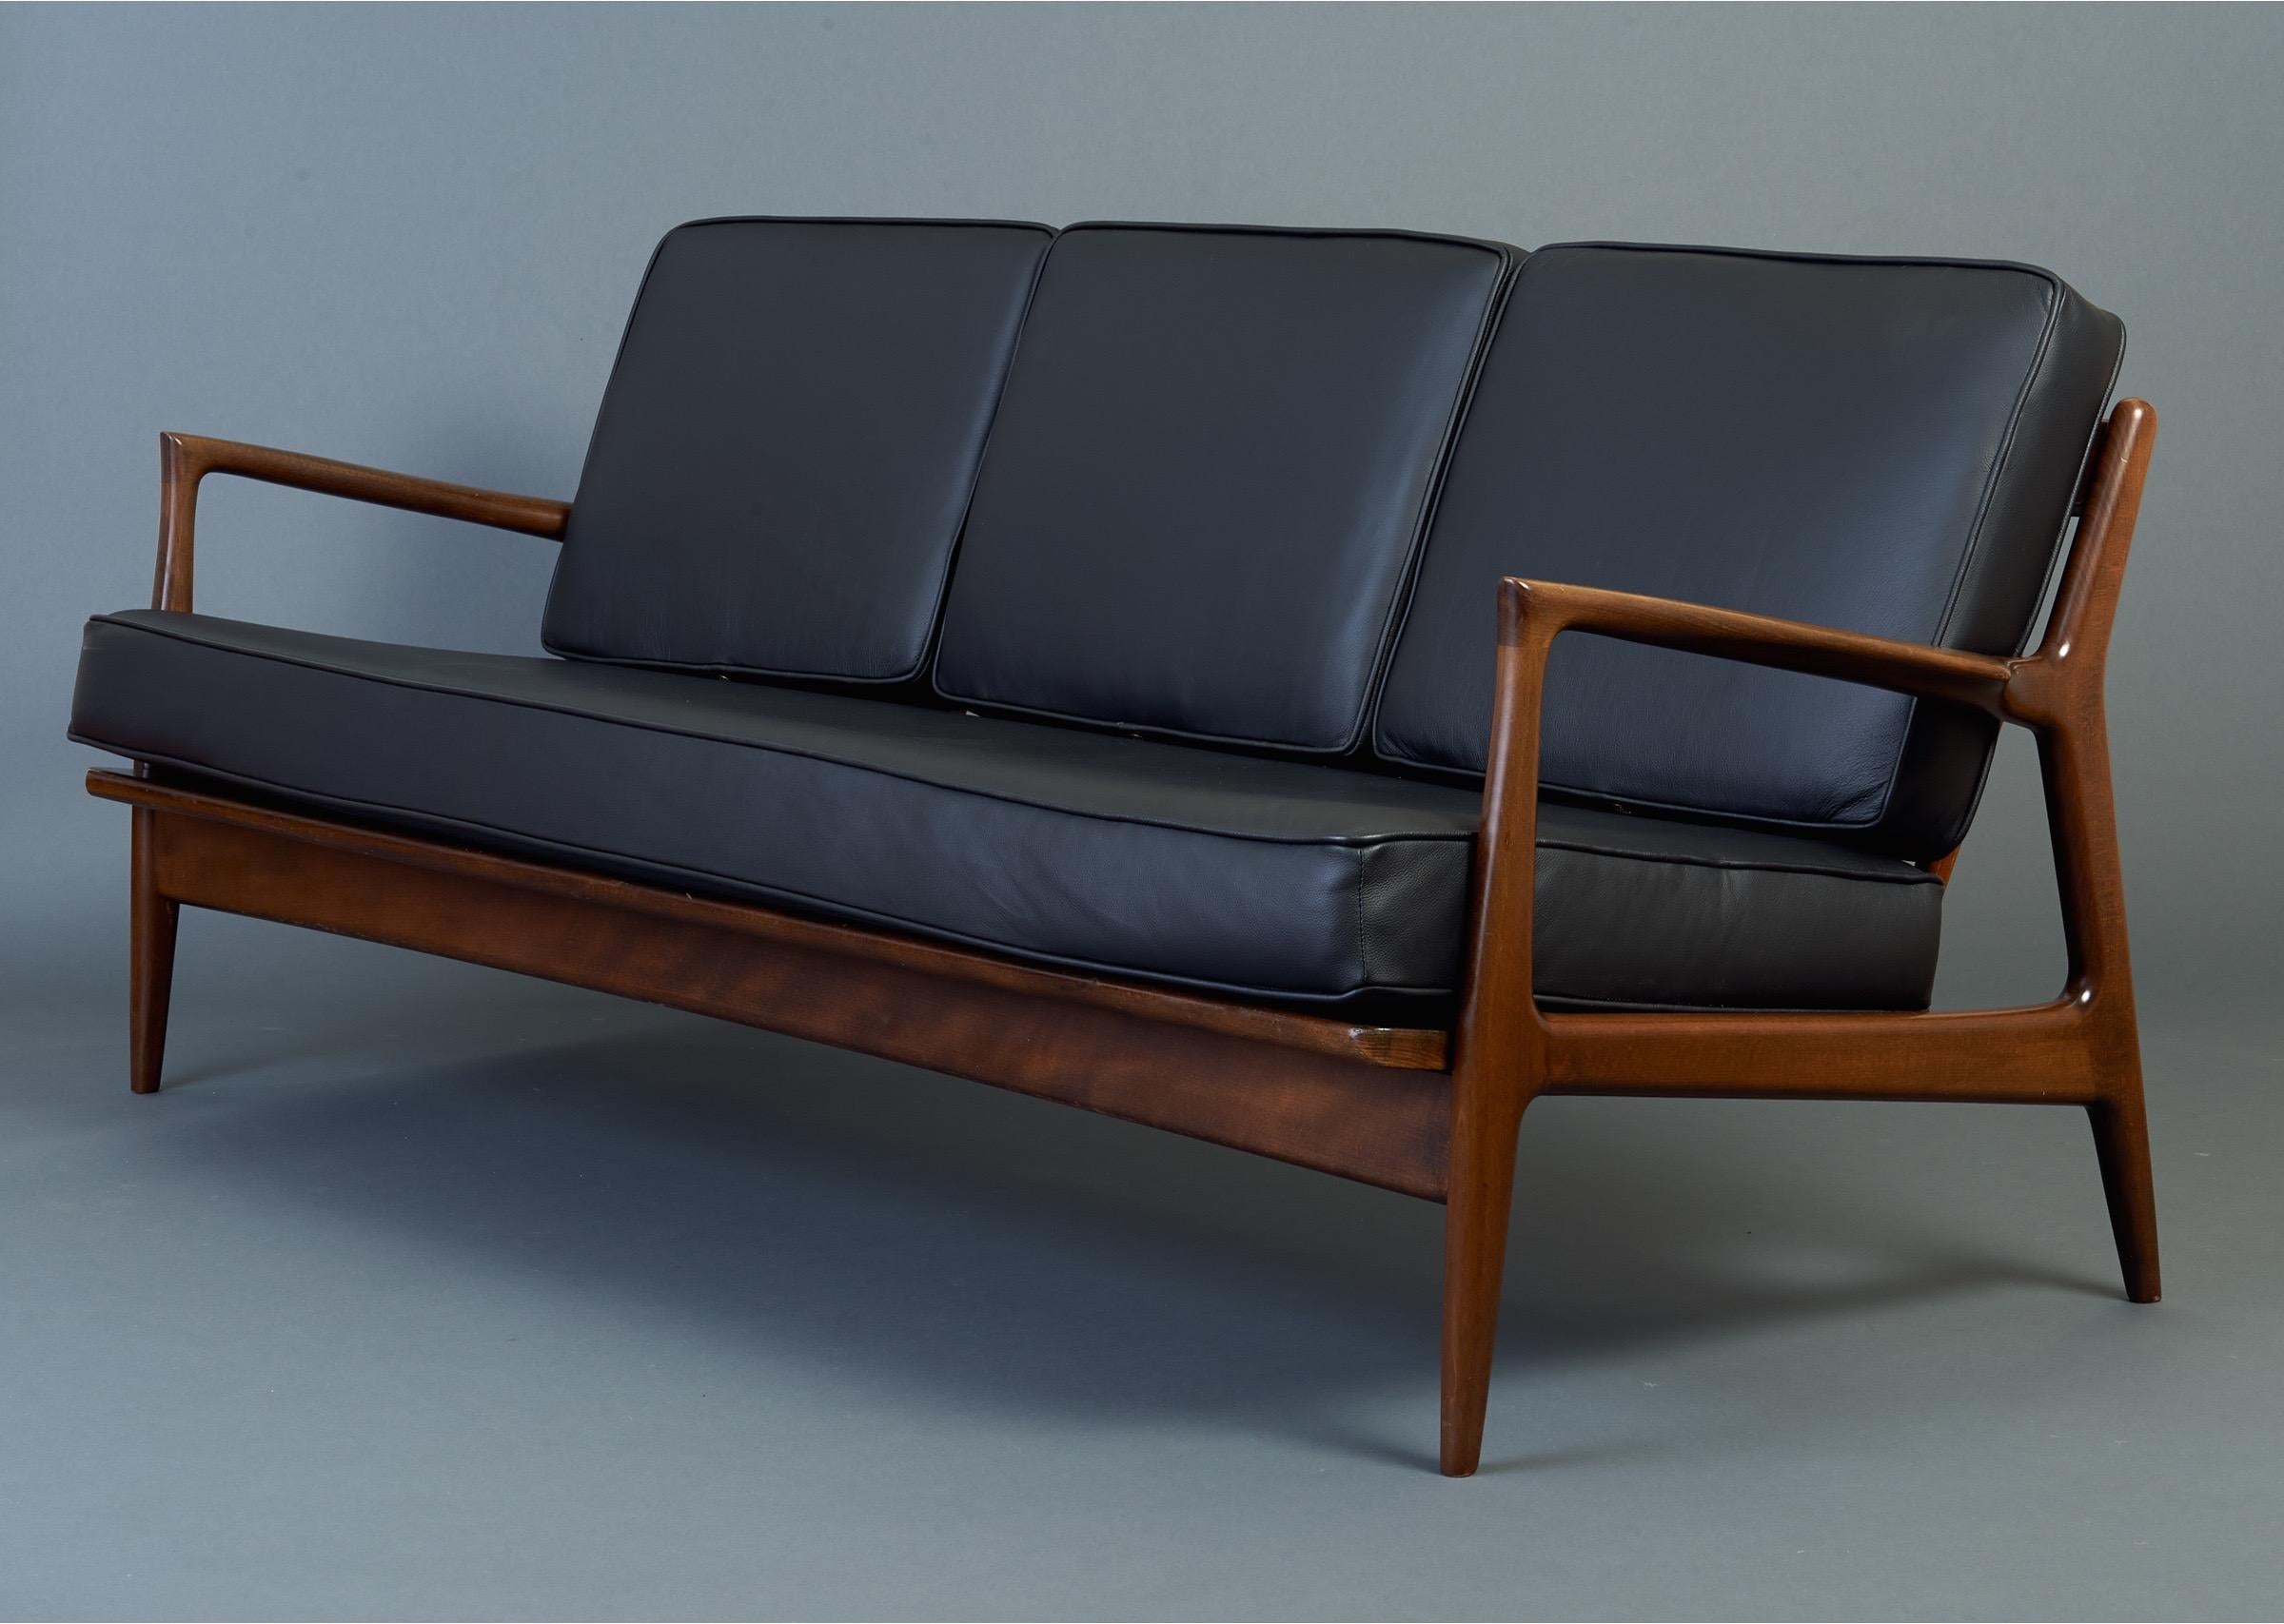 Ib Kofod-Larsen (1921–2003)

Sculptural sofa by Hans Wegner contemporary Ib Kofod-Larsen, for Selig. With graceful mahogany stained teak frame, biomorphic winged armrests, beautifully modeled back slats, and cushions newly upholstered in black